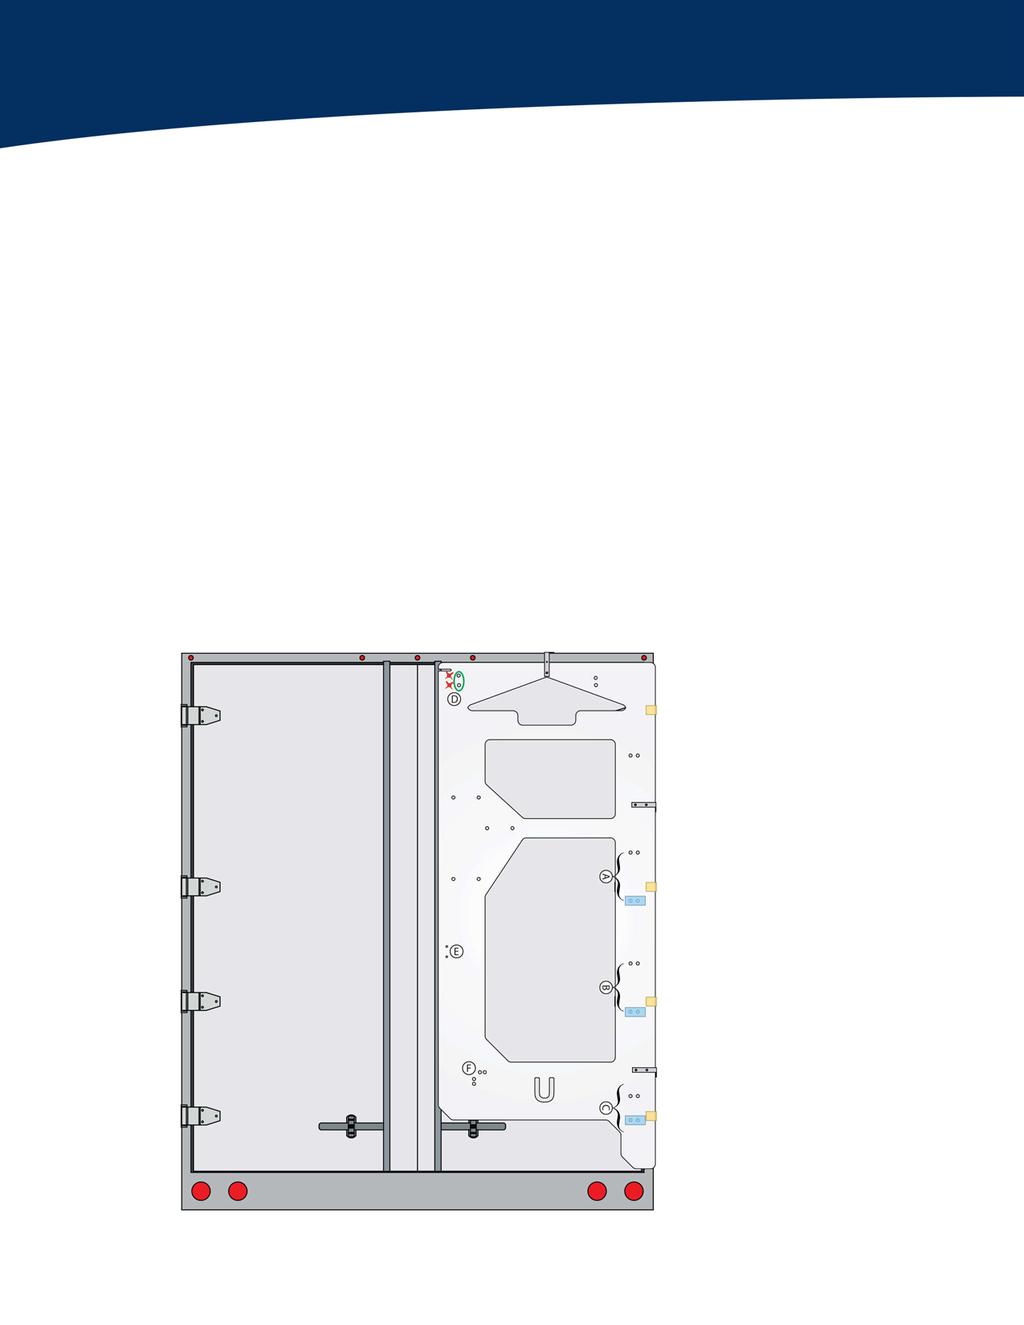 Great Dane Refrigerated Trailer Installation Template 5. Hang the template on the top of the trailer frame. Shift the template over until the side template tabs sit flush to the side of the trailer.